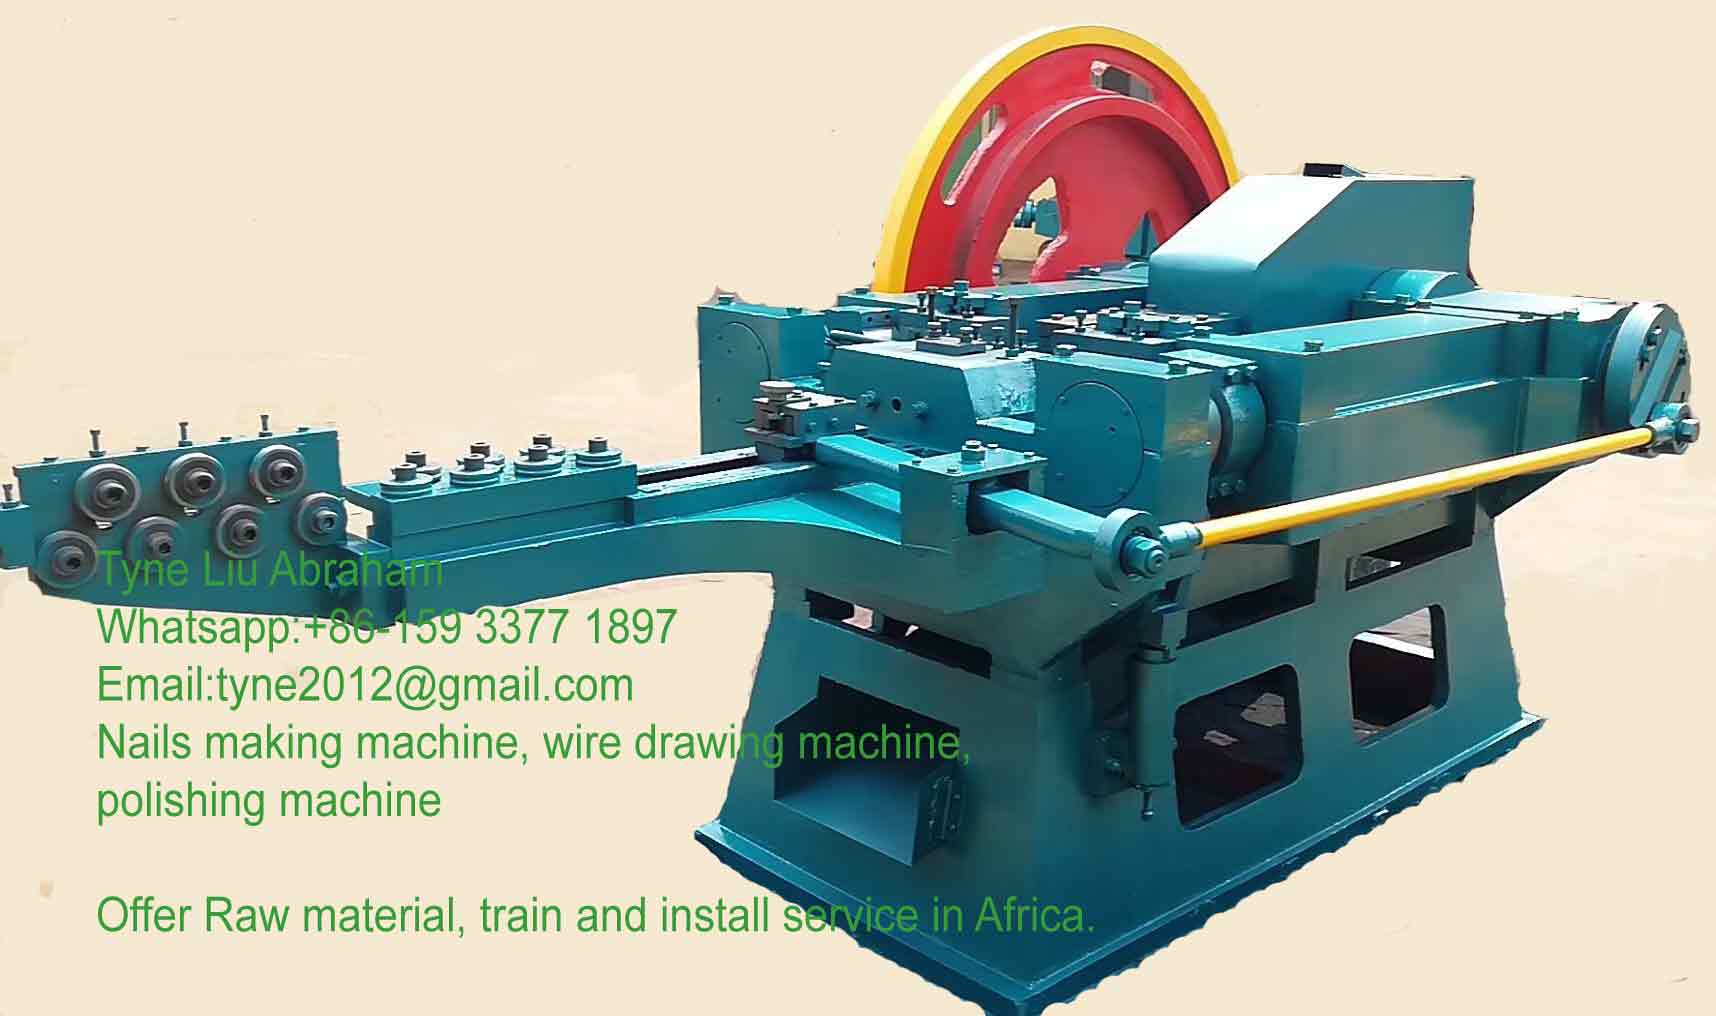 Wire Nail Making Machine at 485000.00 INR in Ahmedabad | Ramvijay  Engineering Private Limited